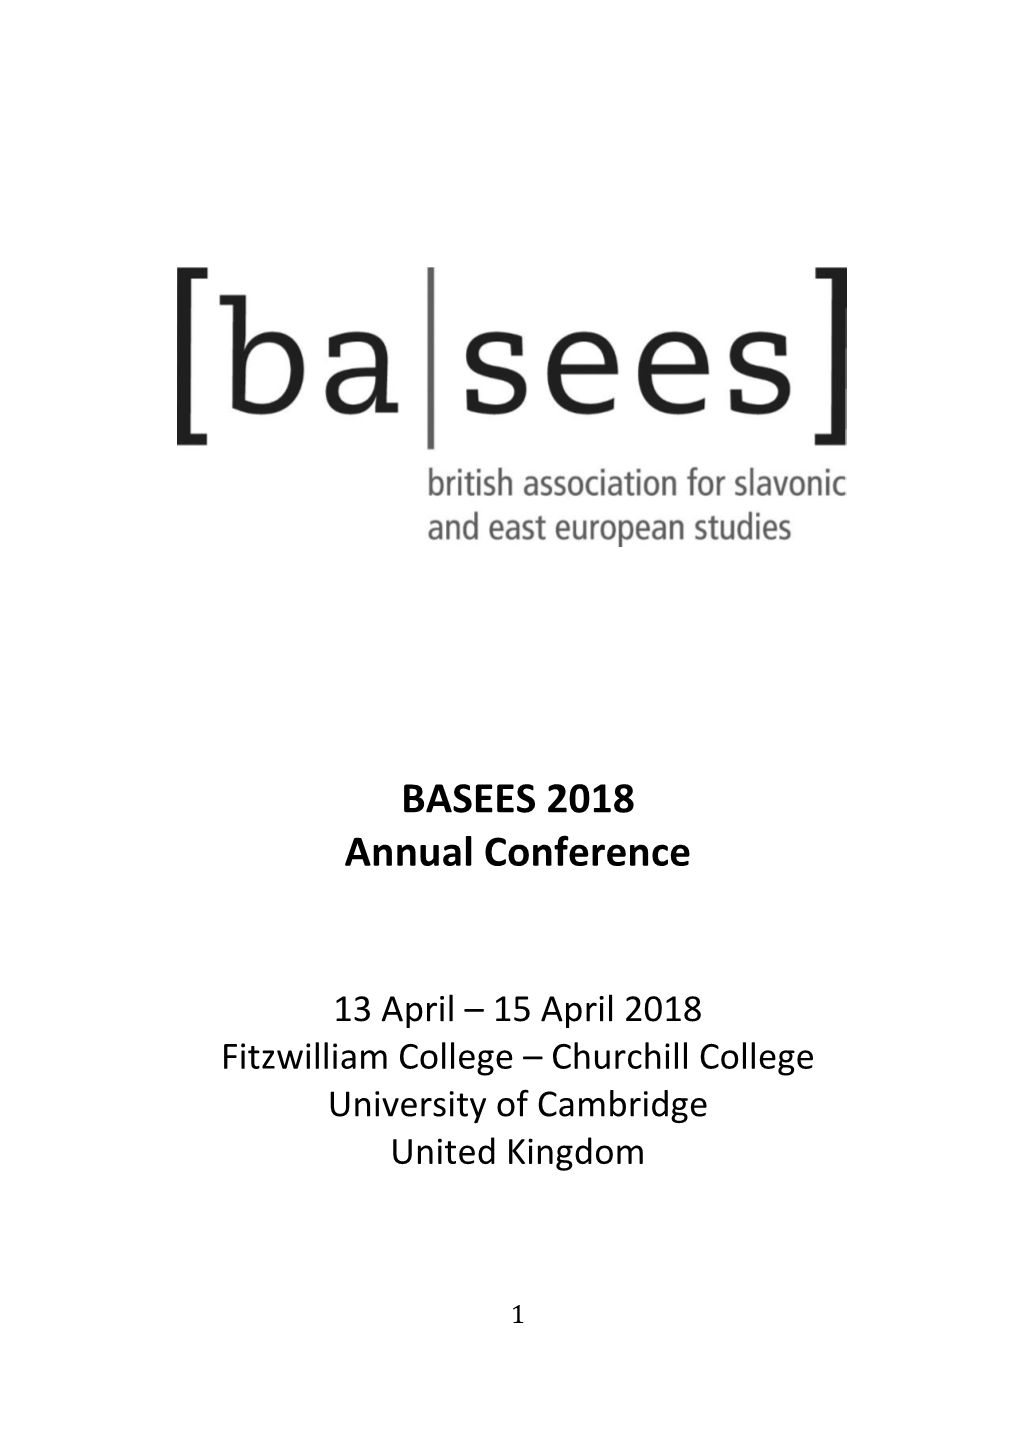 BASEES 2018 Annual Conference